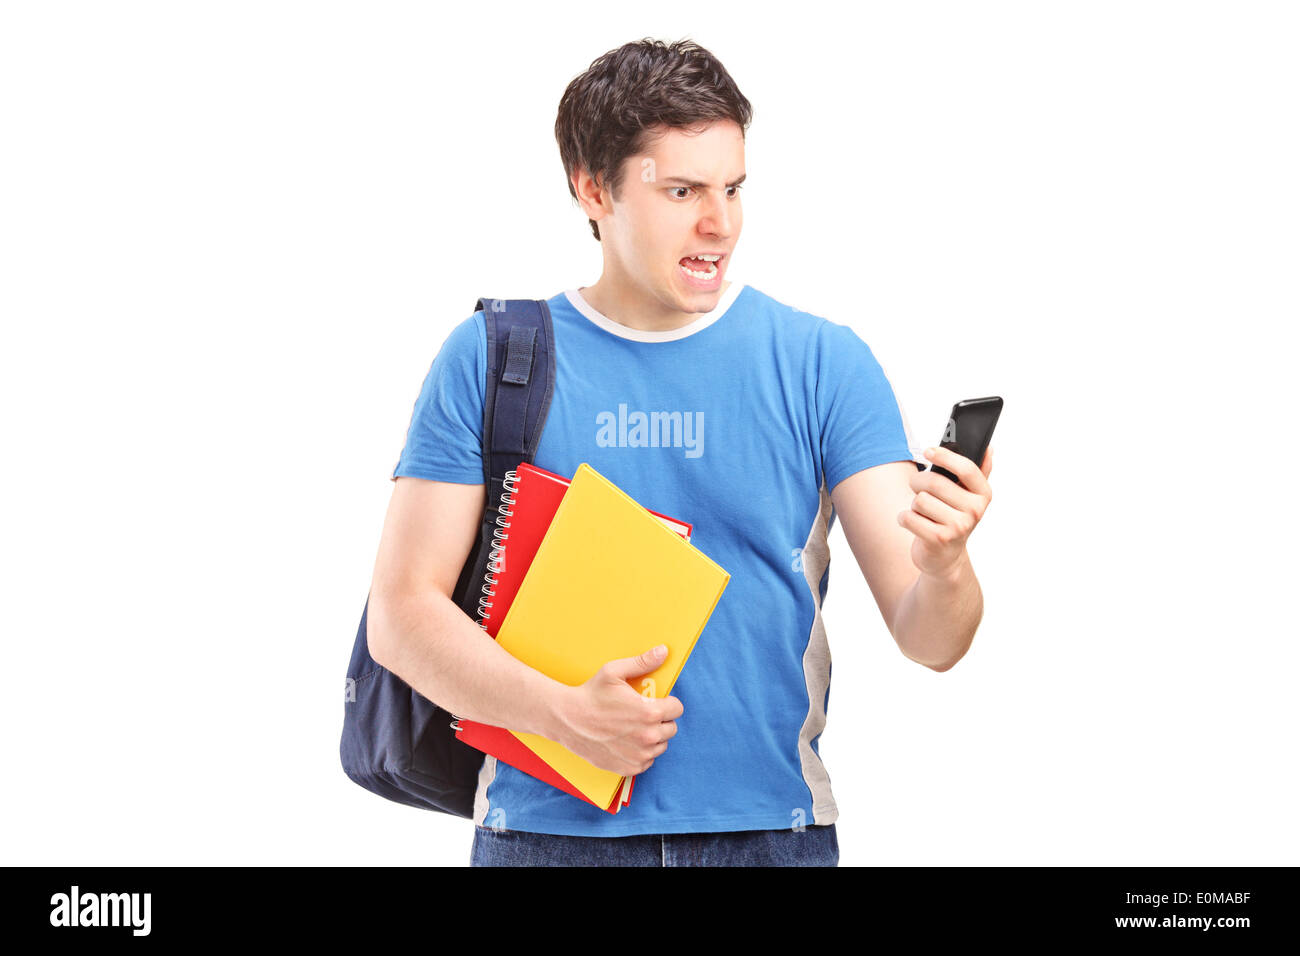 Furious student looking at a cell phone Banque D'Images